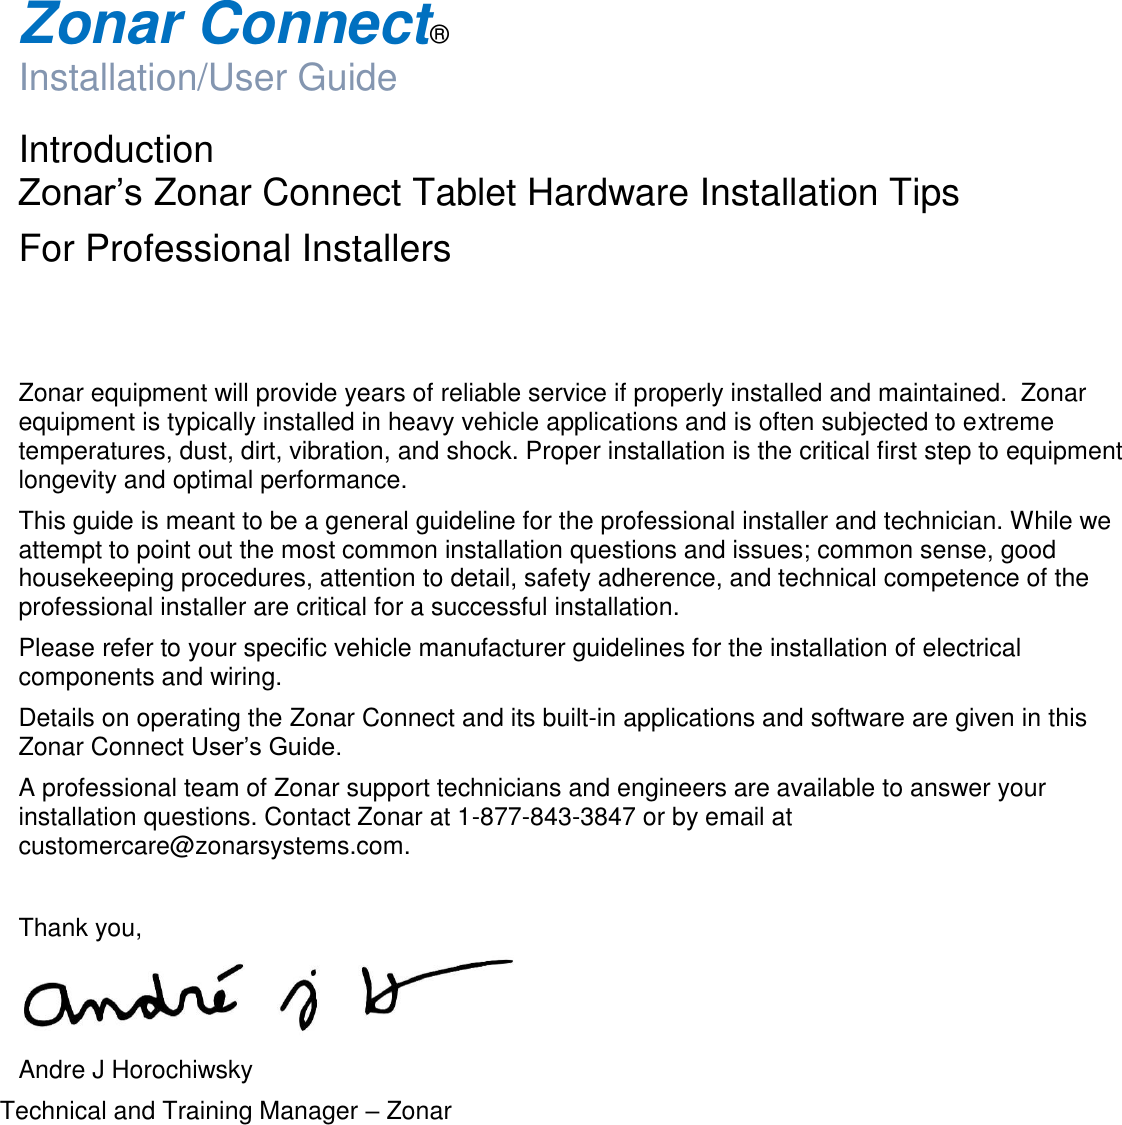  Zonar Connect®  Installation/User Guide  Introduction   Zonar’s Zonar Connect Tablet Hardware Installation Tips  For Professional Installers   Zonar equipment will provide years of reliable service if properly installed and maintained.  Zonar equipment is typically installed in heavy vehicle applications and is often subjected to extreme temperatures, dust, dirt, vibration, and shock. Proper installation is the critical first step to equipment longevity and optimal performance. This guide is meant to be a general guideline for the professional installer and technician. While we attempt to point out the most common installation questions and issues; common sense, good housekeeping procedures, attention to detail, safety adherence, and technical competence of the professional installer are critical for a successful installation. Please refer to your specific vehicle manufacturer guidelines for the installation of electrical components and wiring. Details on operating the Zonar Connect and its built-in applications and software are given in this Zonar Connect User’s Guide. A professional team of Zonar support technicians and engineers are available to answer your installation questions. Contact Zonar at 1-877-843-3847 or by email at customercare@zonarsystems.com.  Thank you,  Andre J Horochiwsky Technical and Training Manager – Zonar     